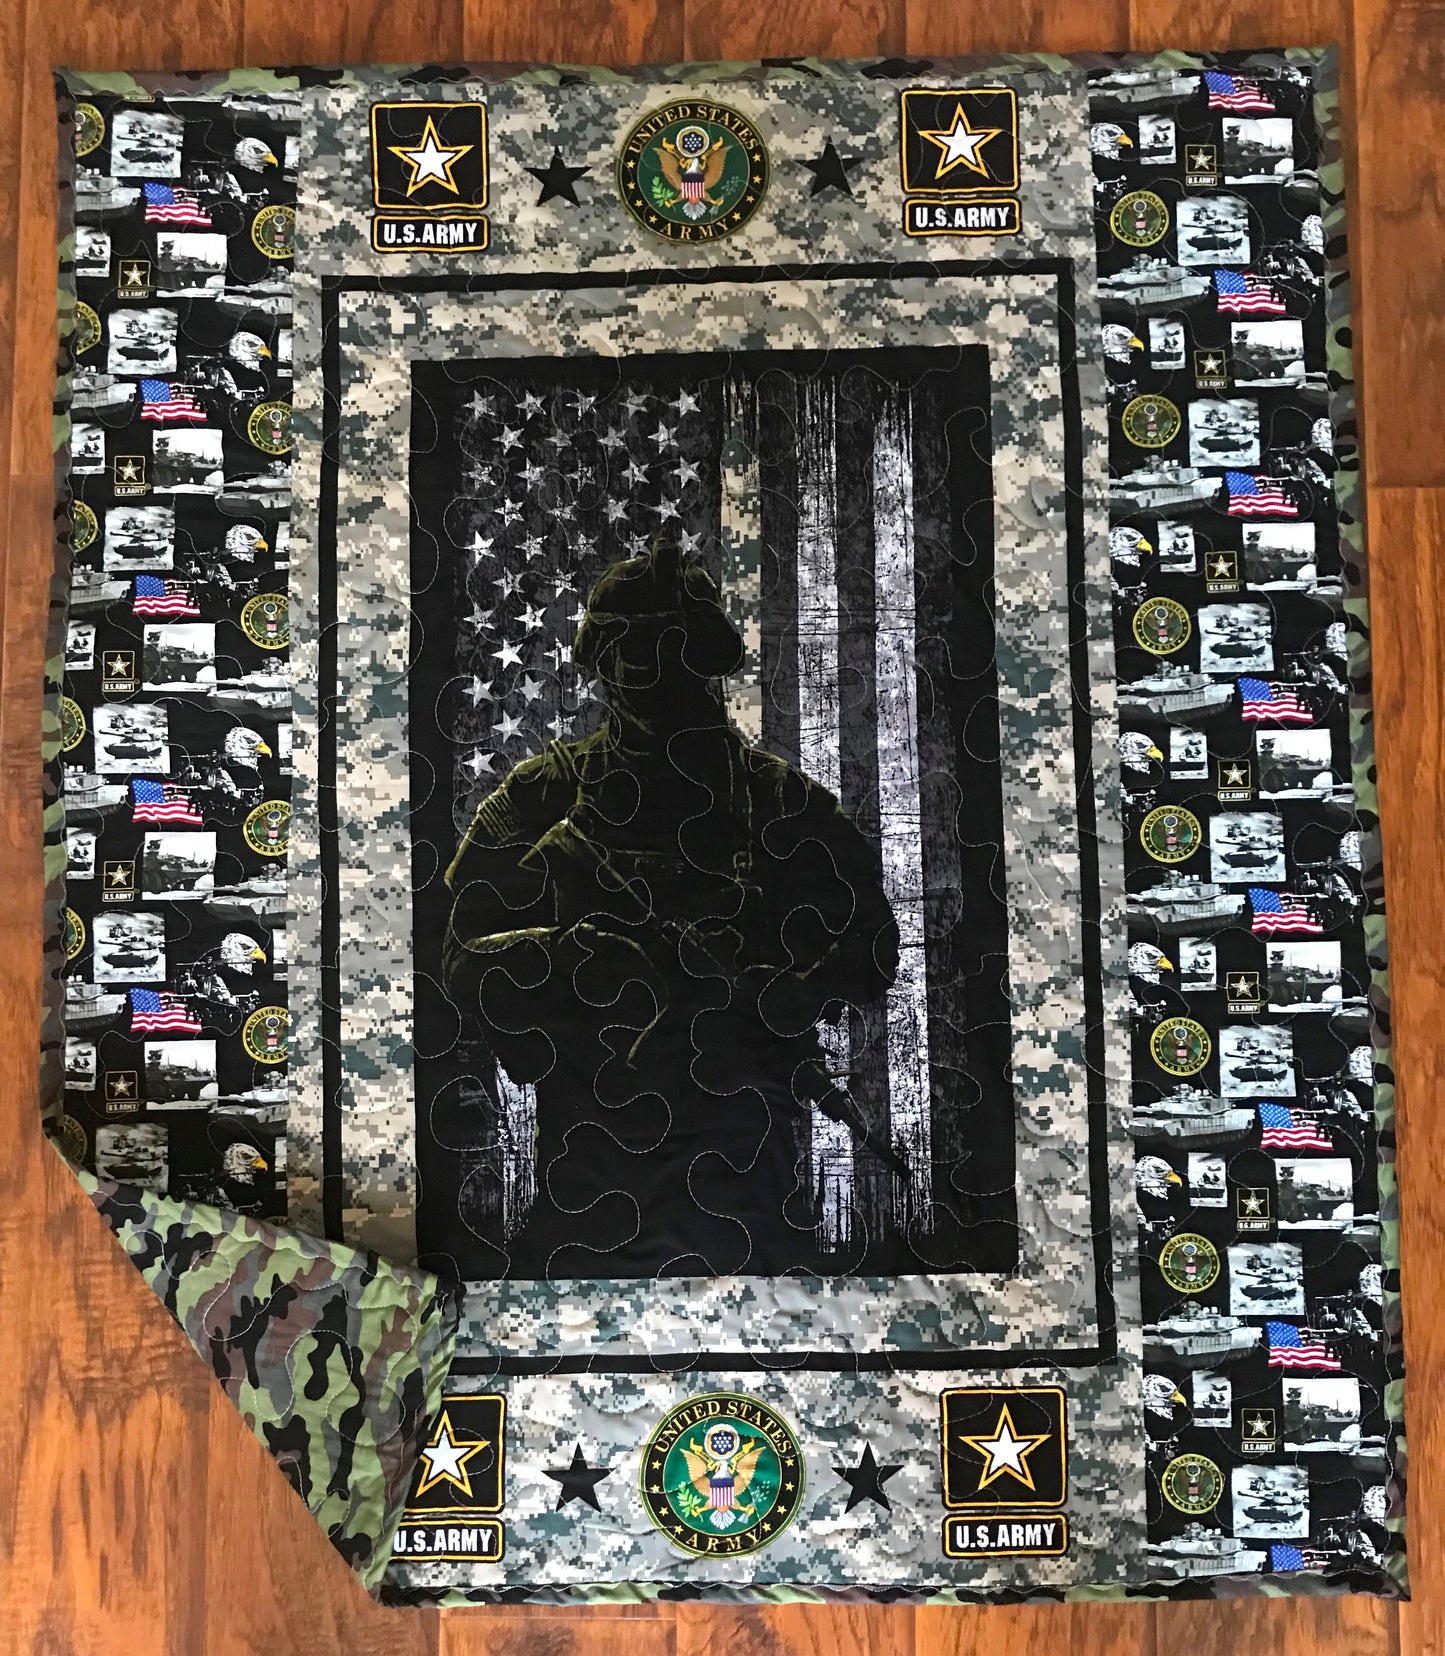 US ARMY MILITARY inspired Quilted Blanket